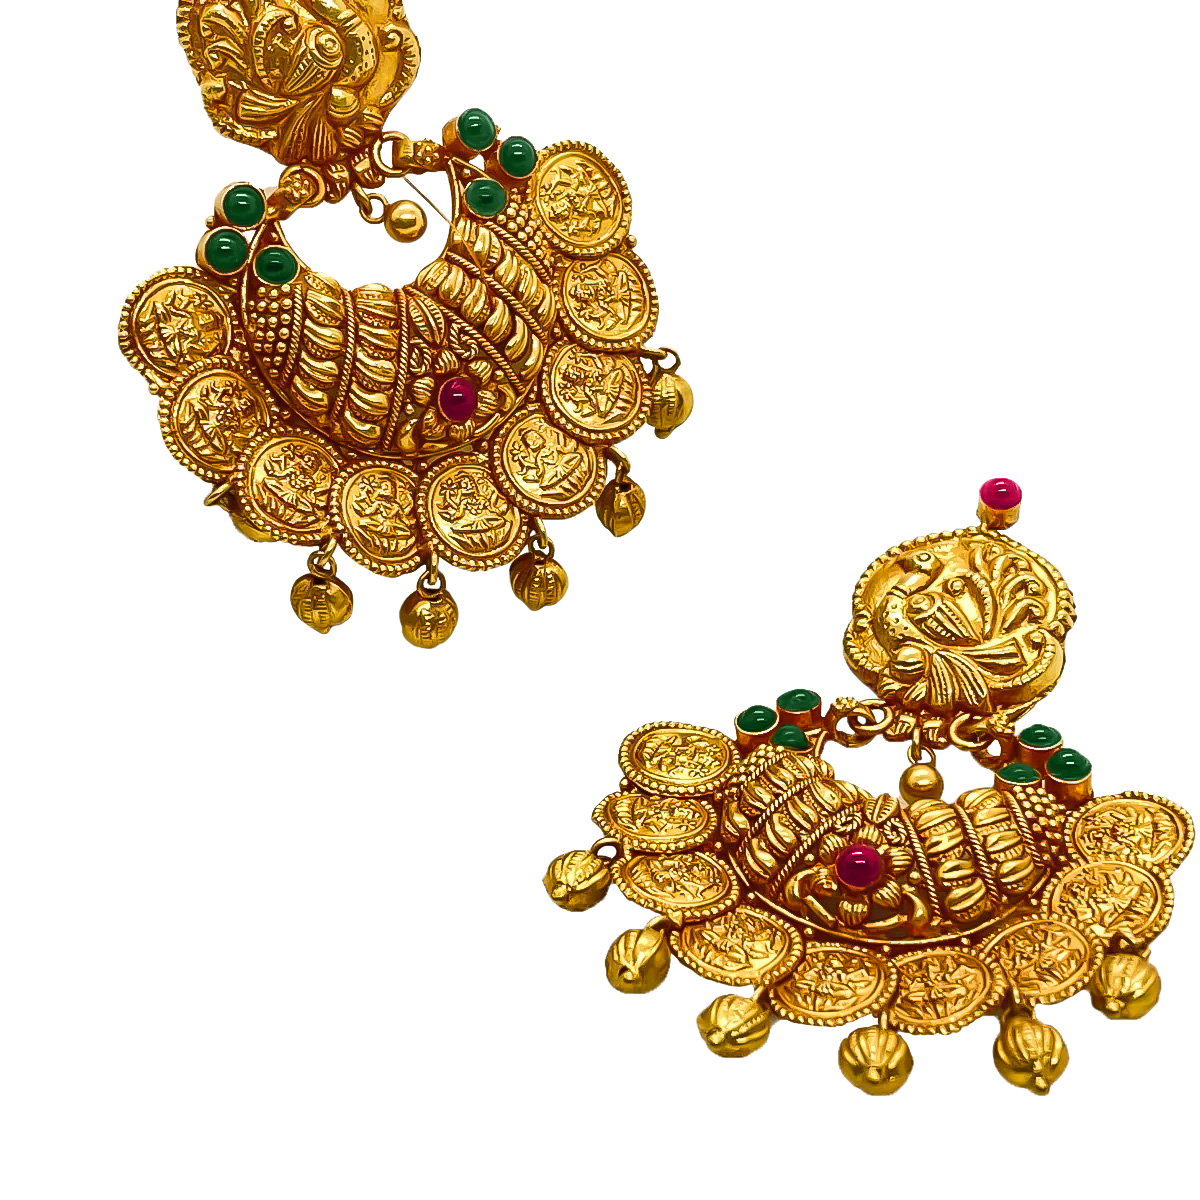 The Antique Temple Gold Earrings